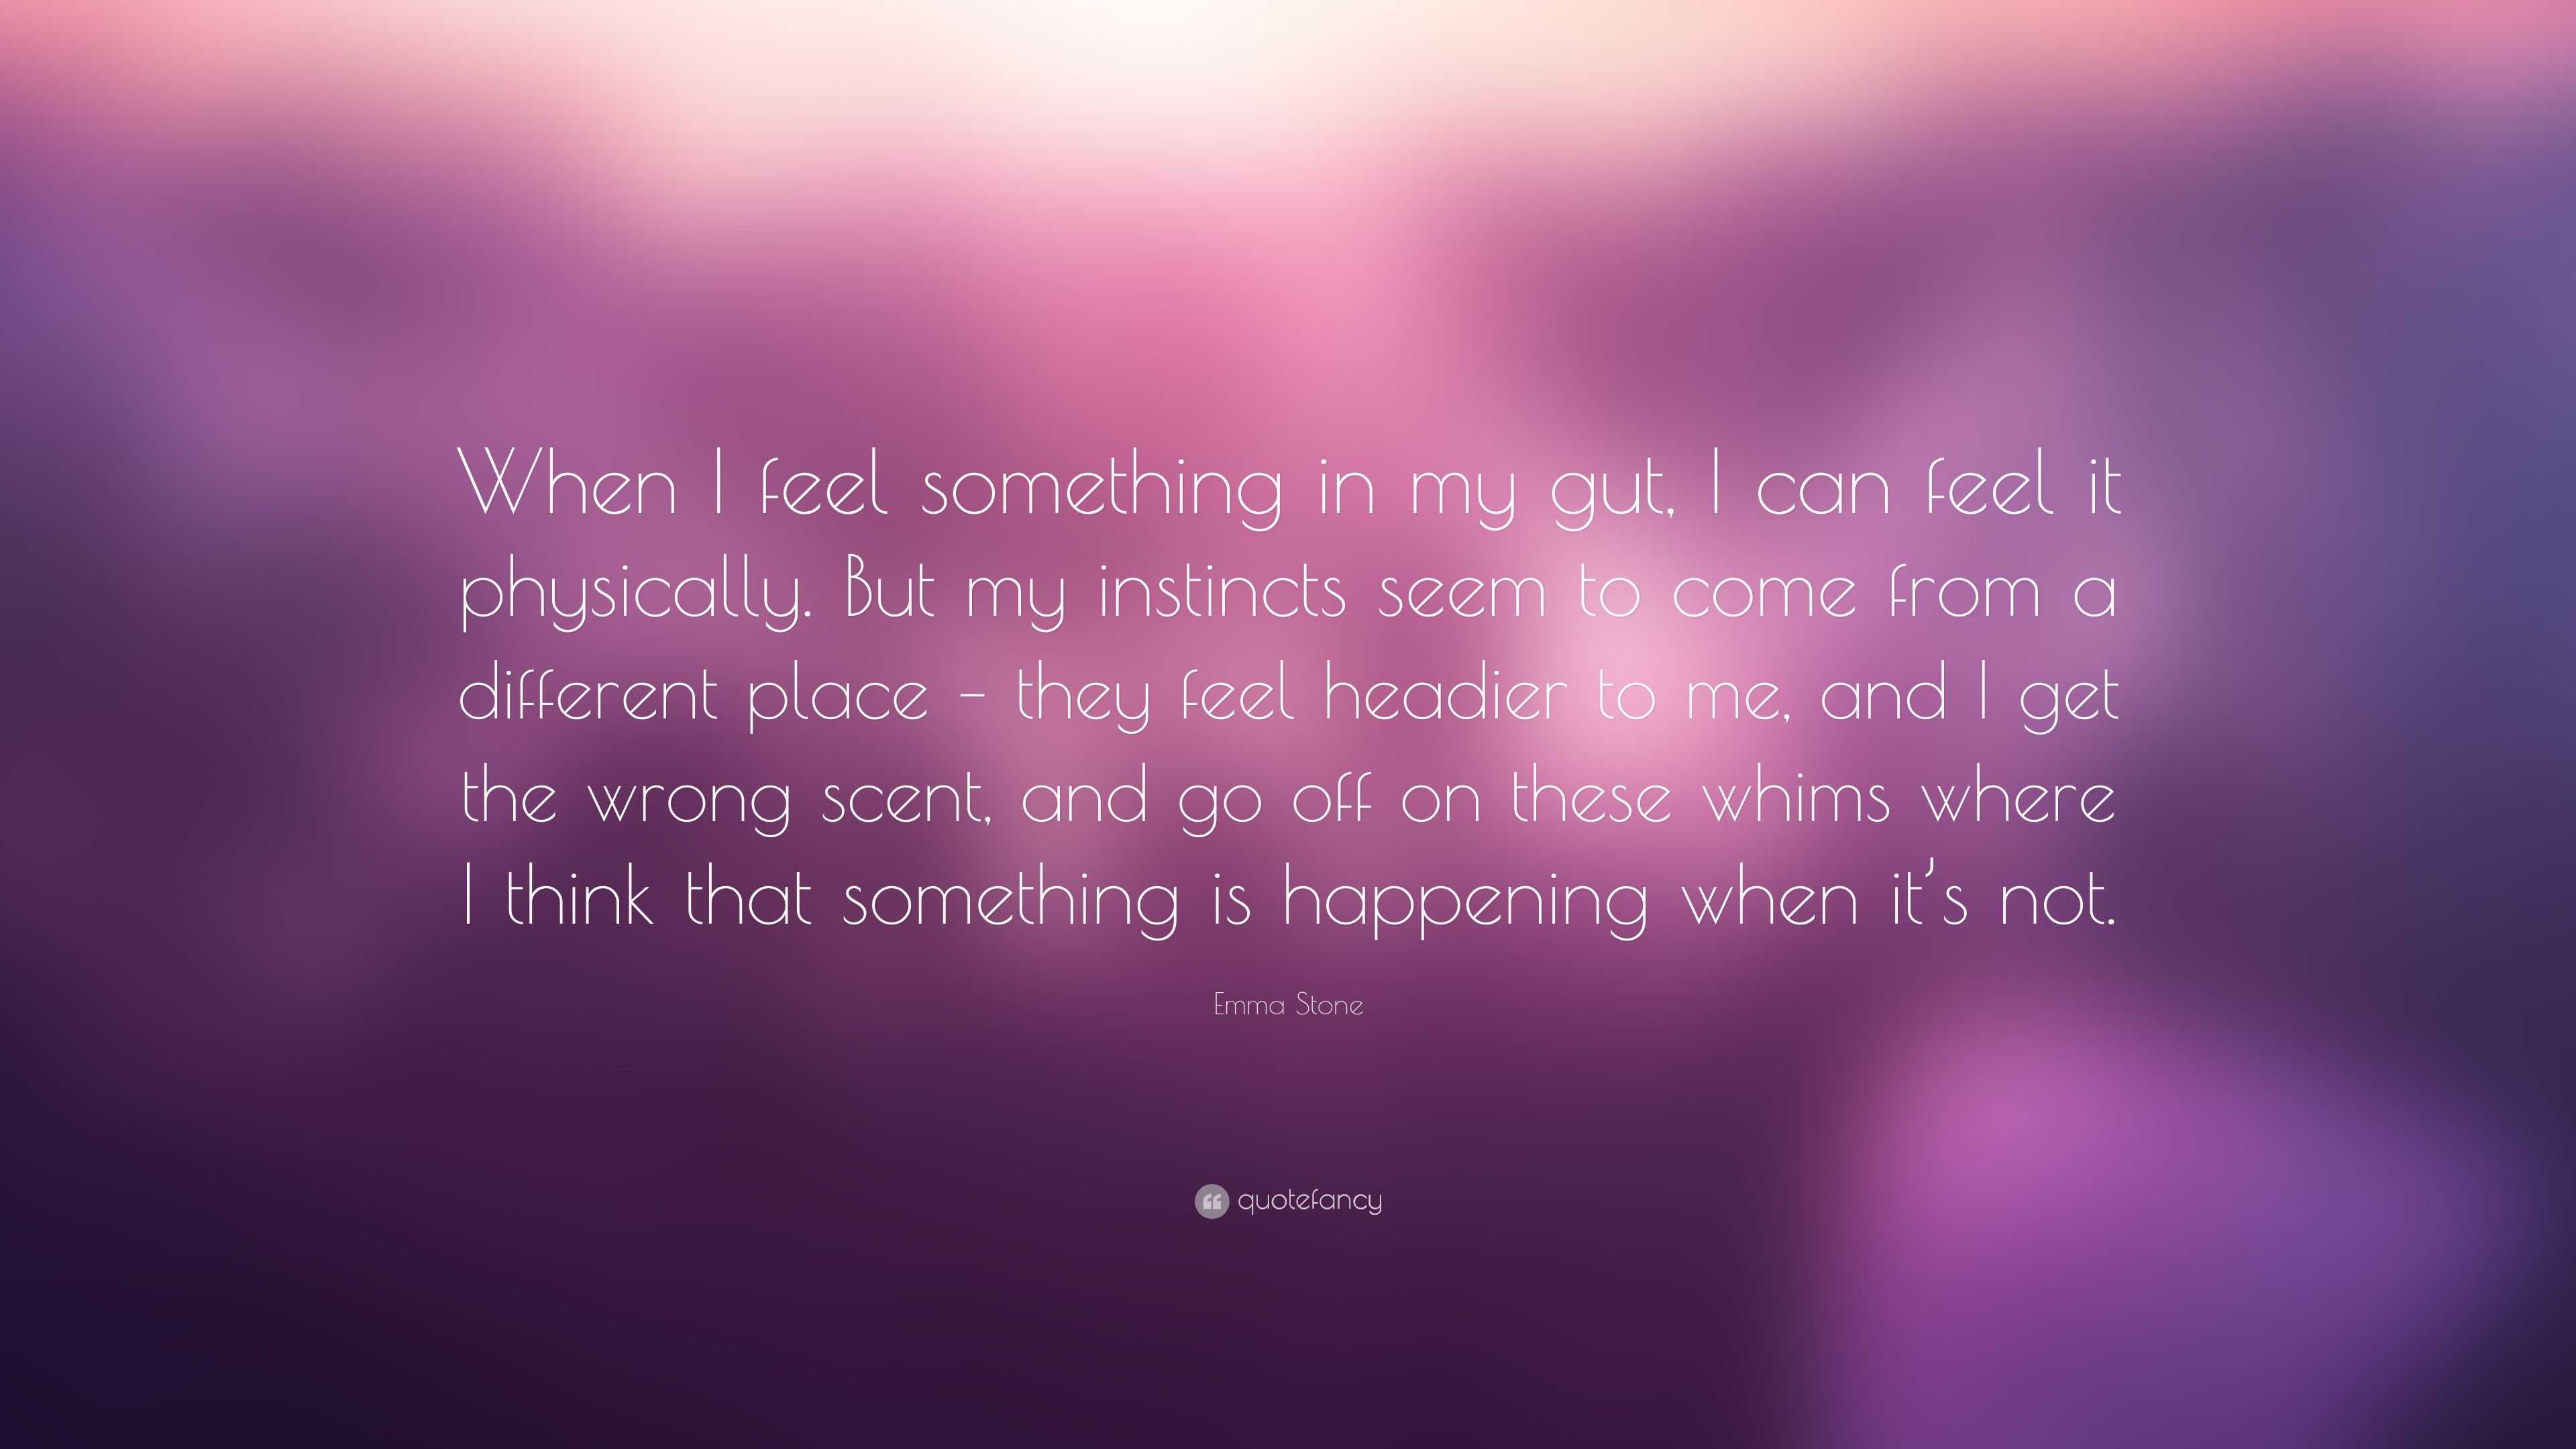 Emma Stone Quote: “When I feel something in my gut, I can feel it ...